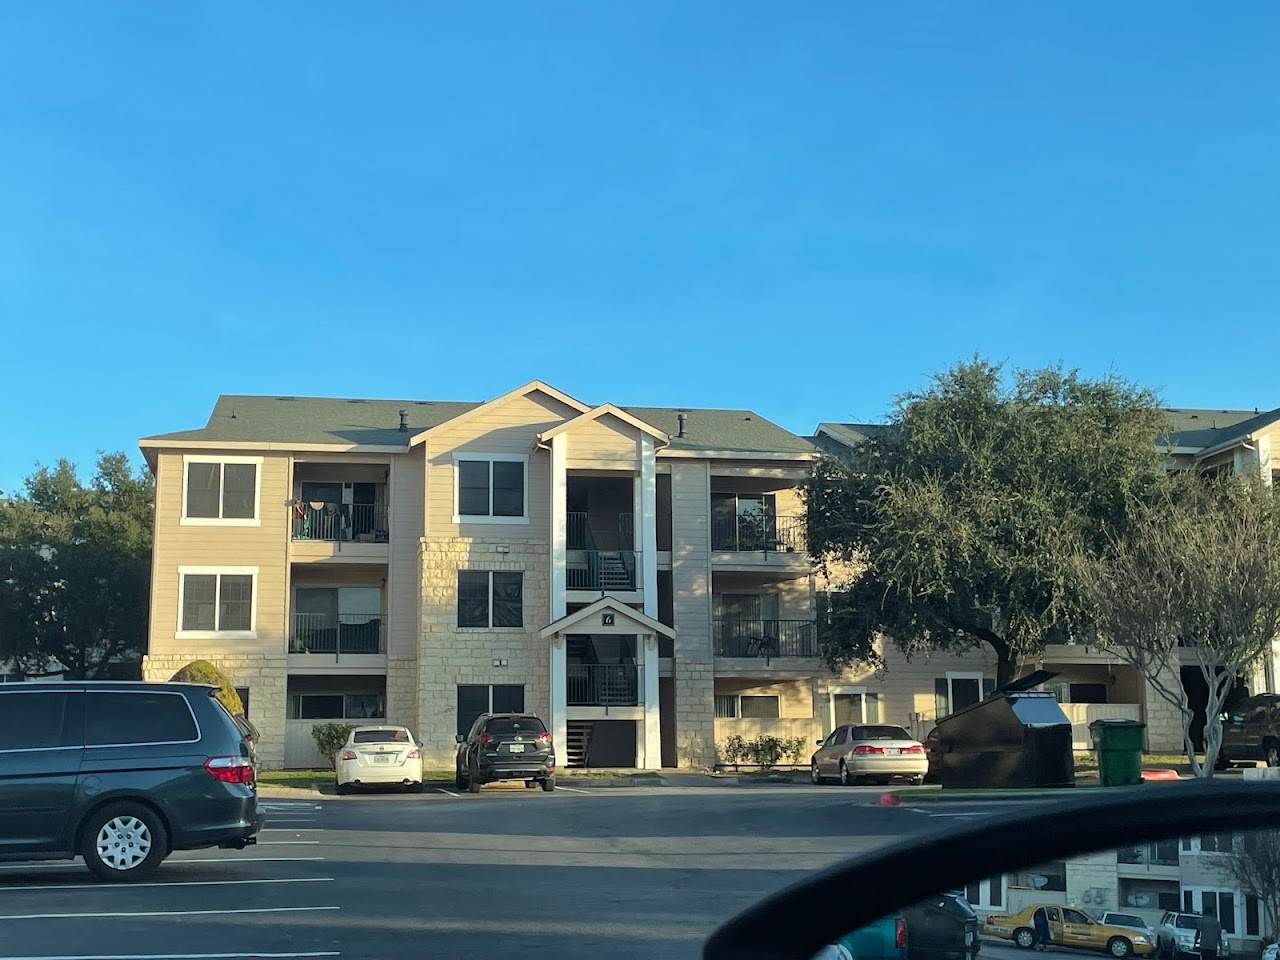 Photo of ARROWHEAD PARK APTS. Affordable housing located at 605 MASTERSON PASS AUSTIN, TX 78753